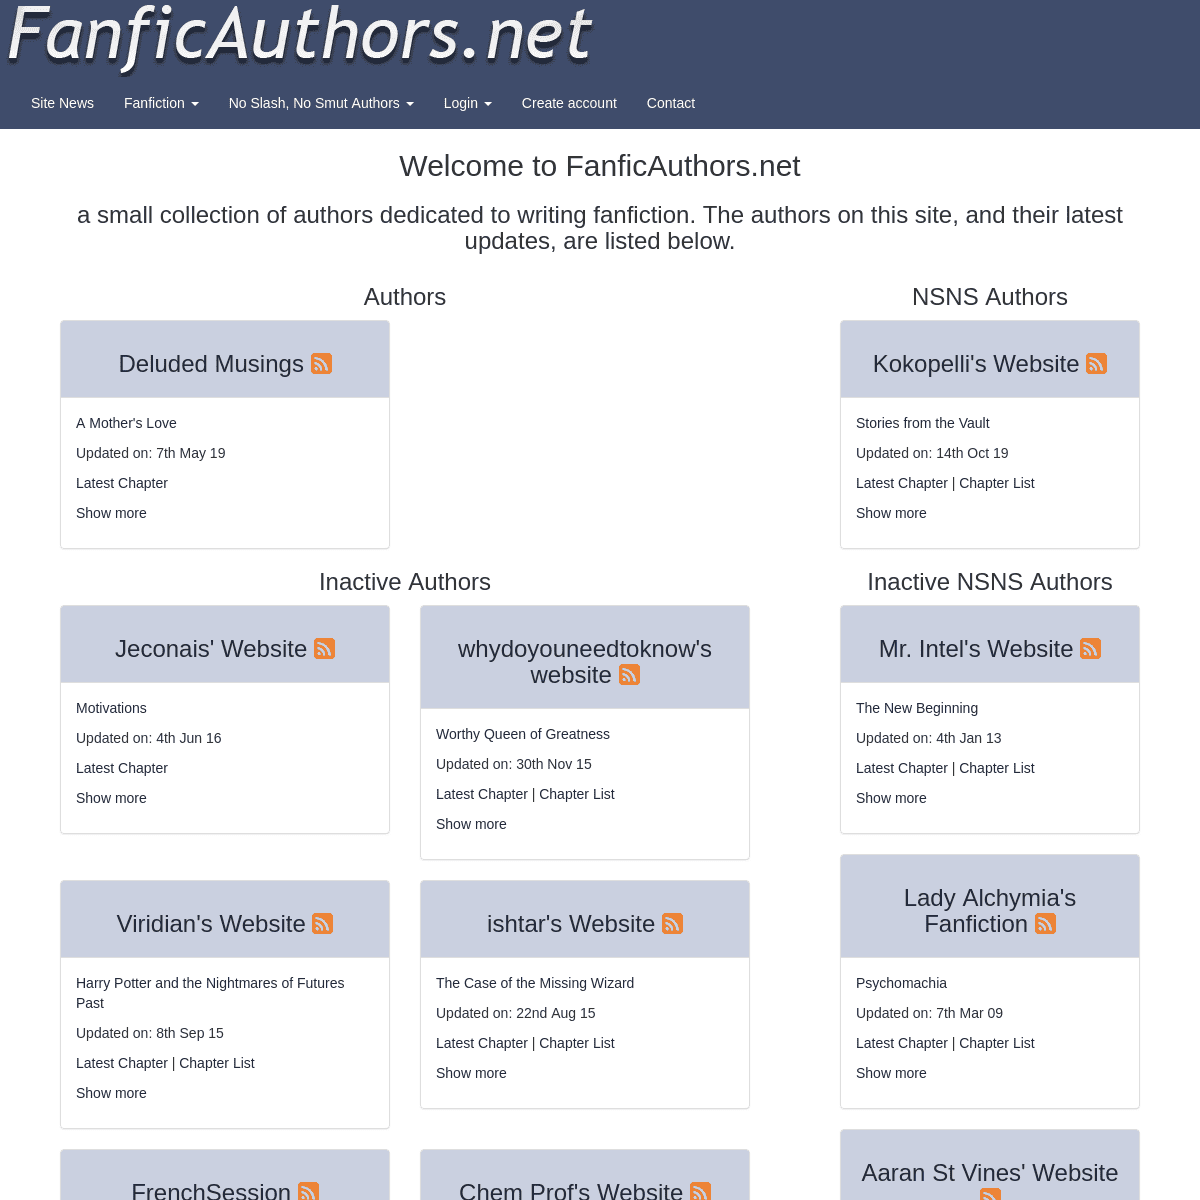 A complete backup of fanficauthors.net